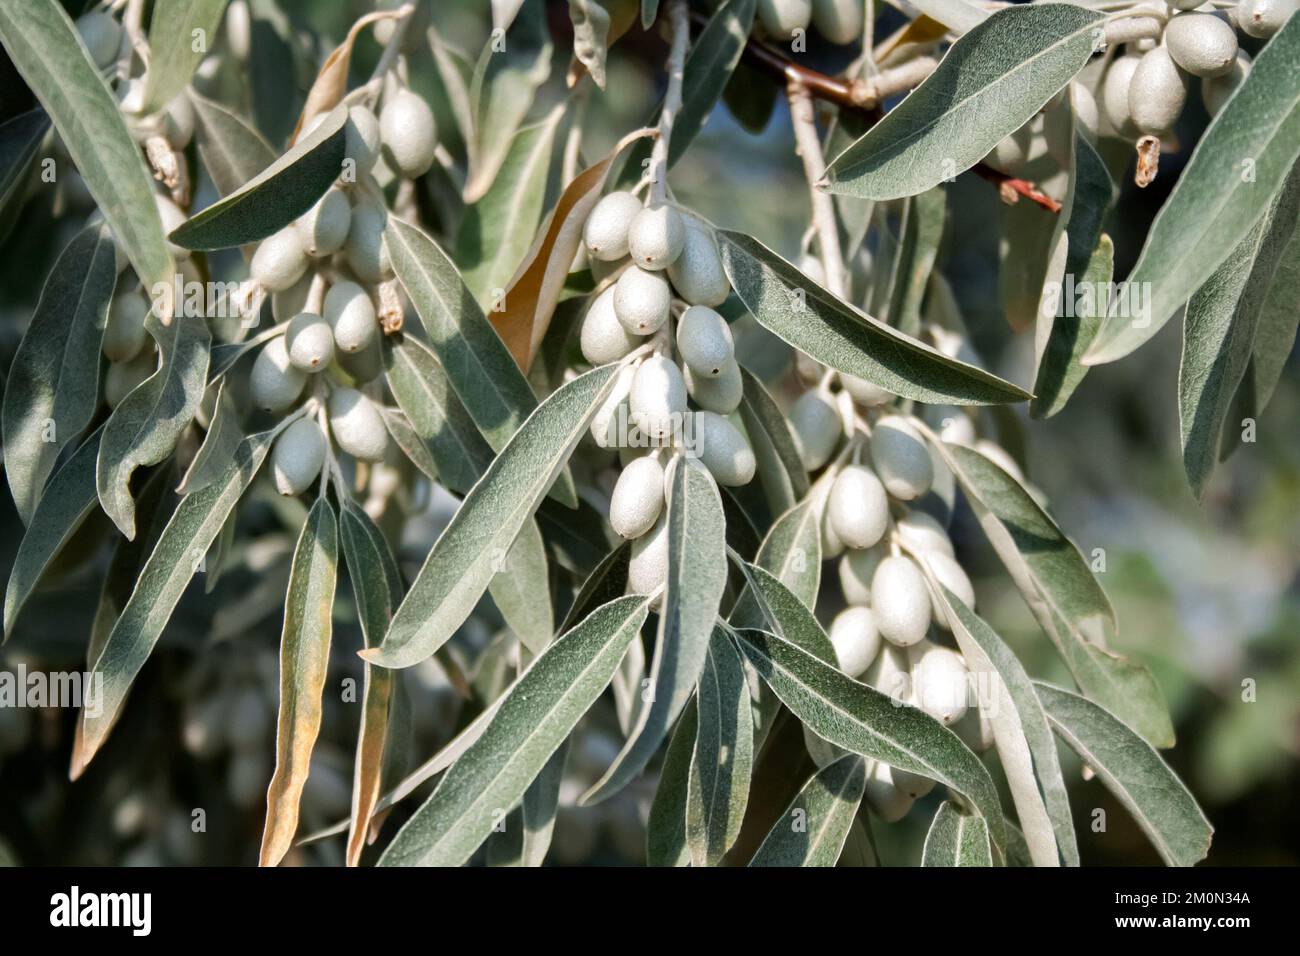 Closeup of Elaeagnus angustifolia (commonly called Russian olive, silver berry, oleaster, Persian olive, or wild olive) branch with green fruits Stock Photo